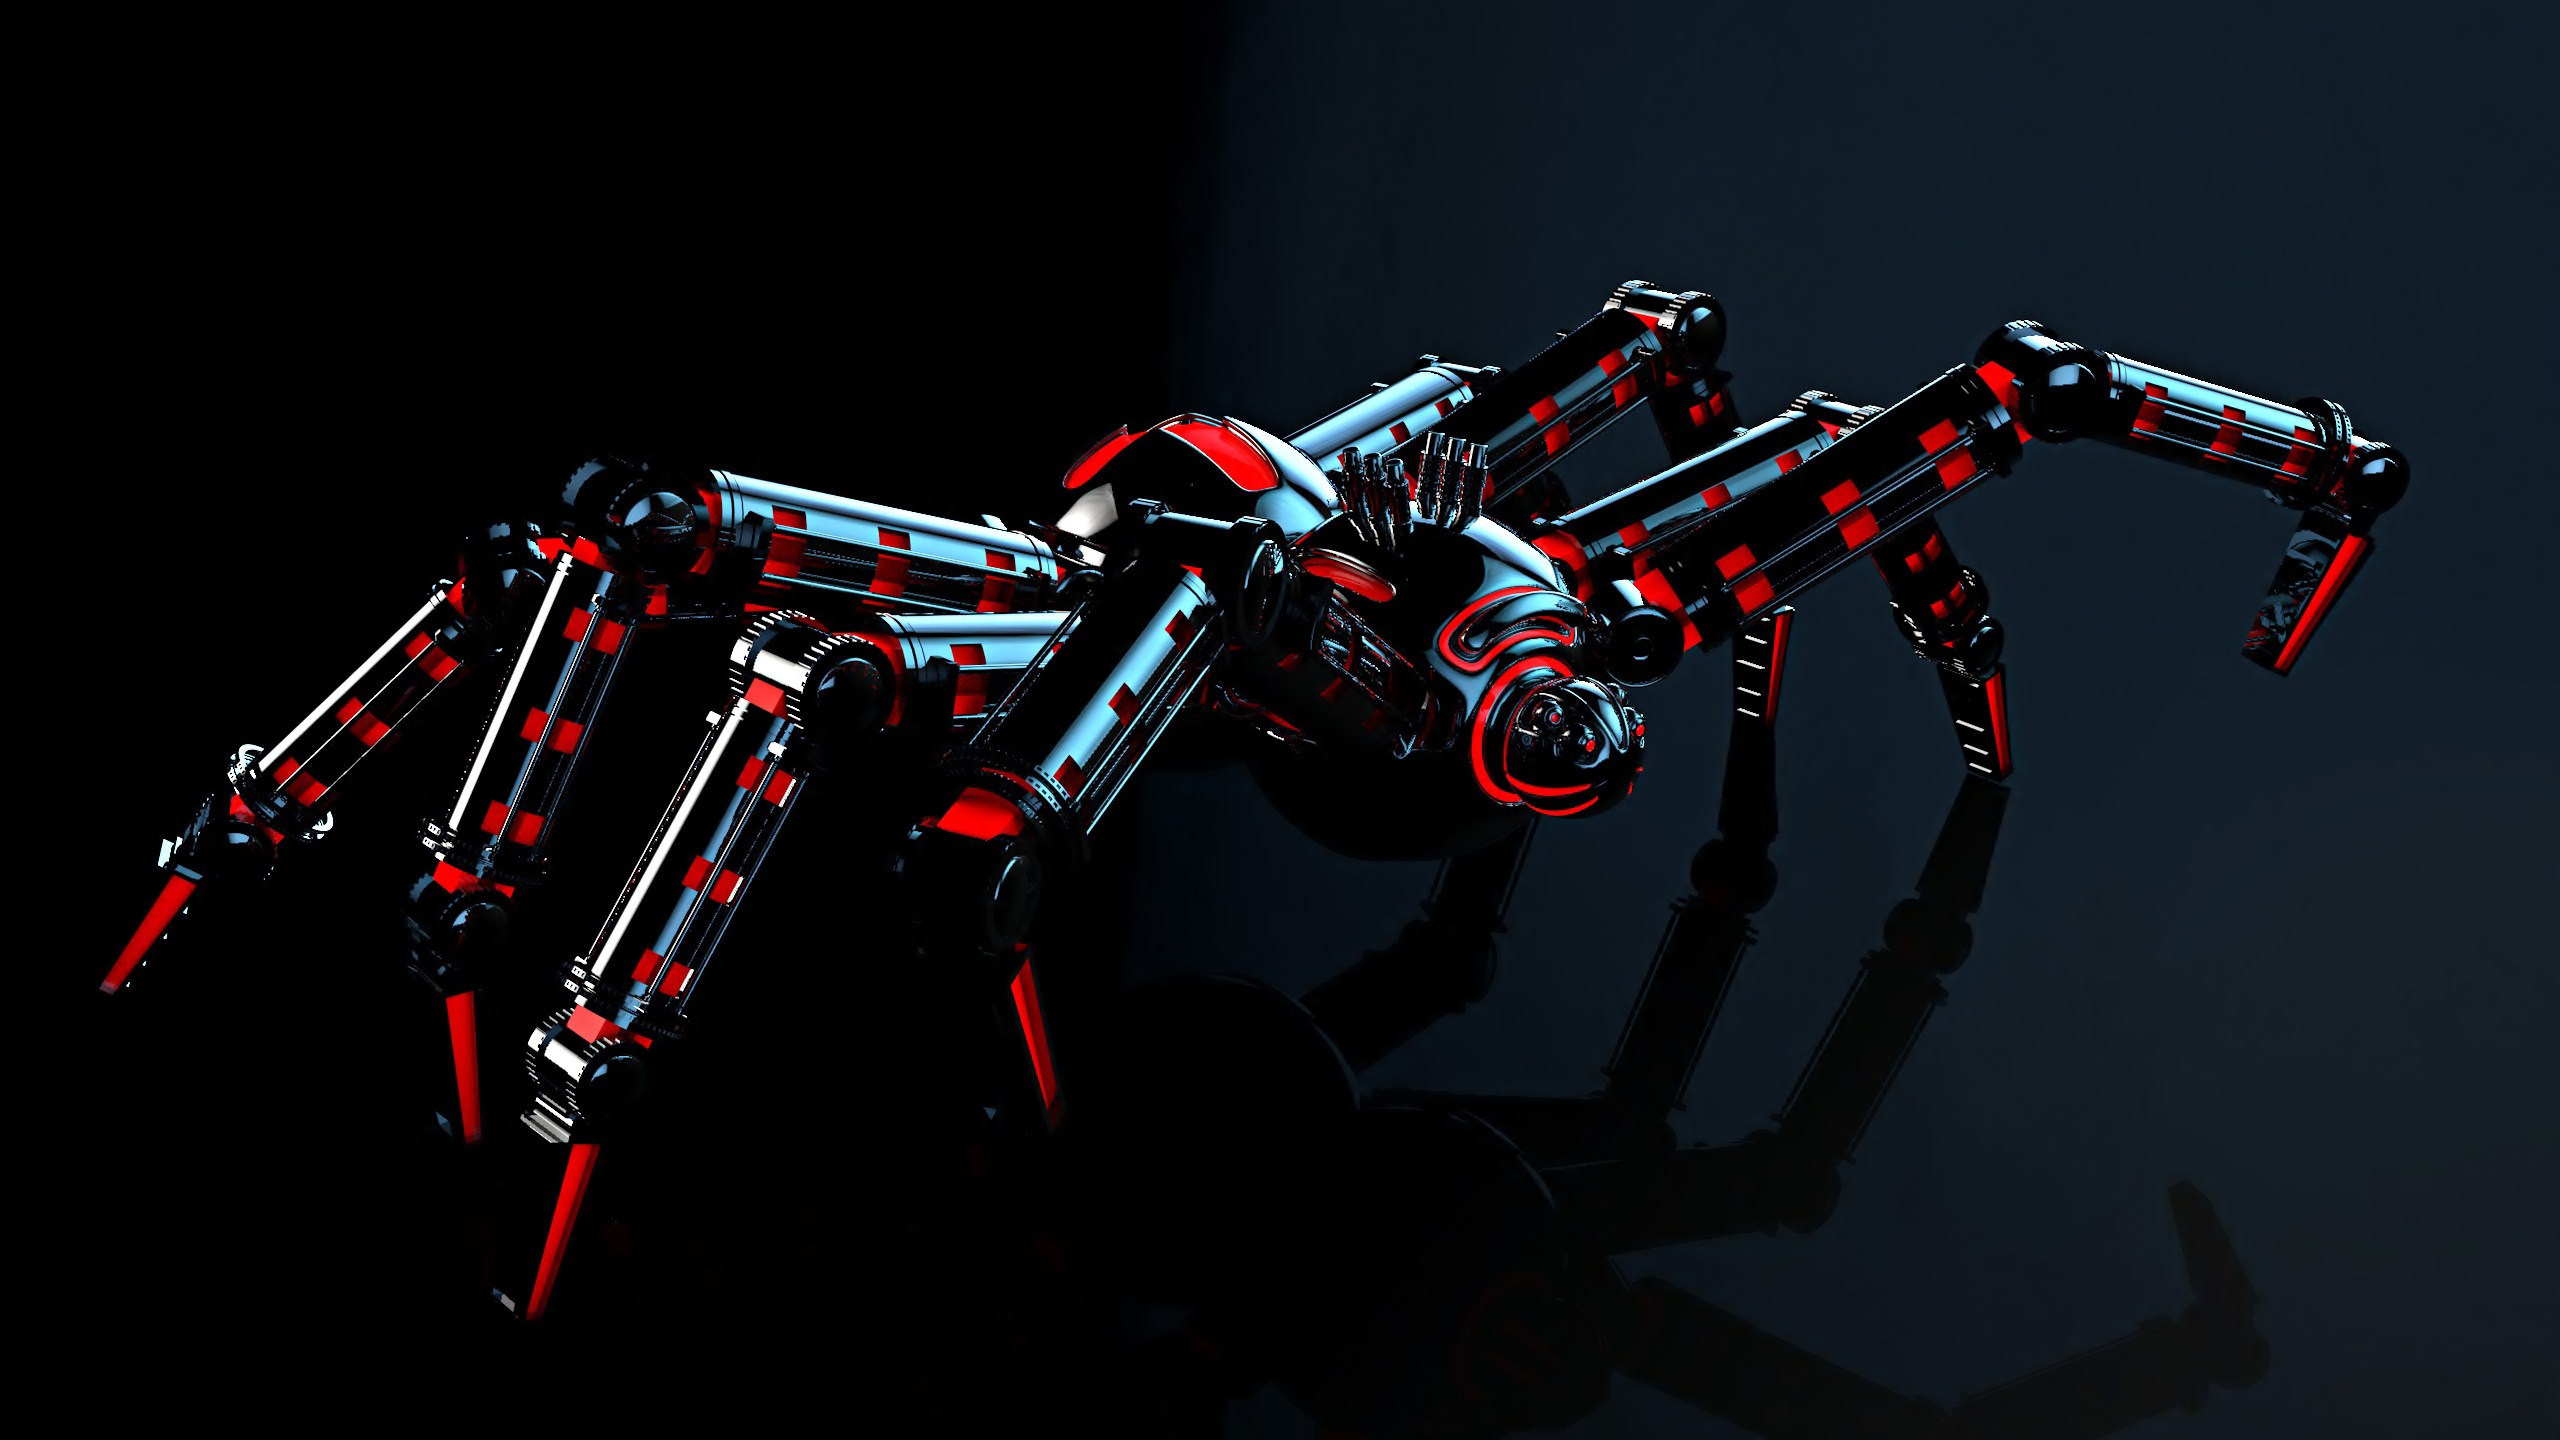 Animated Spider Wallpaper